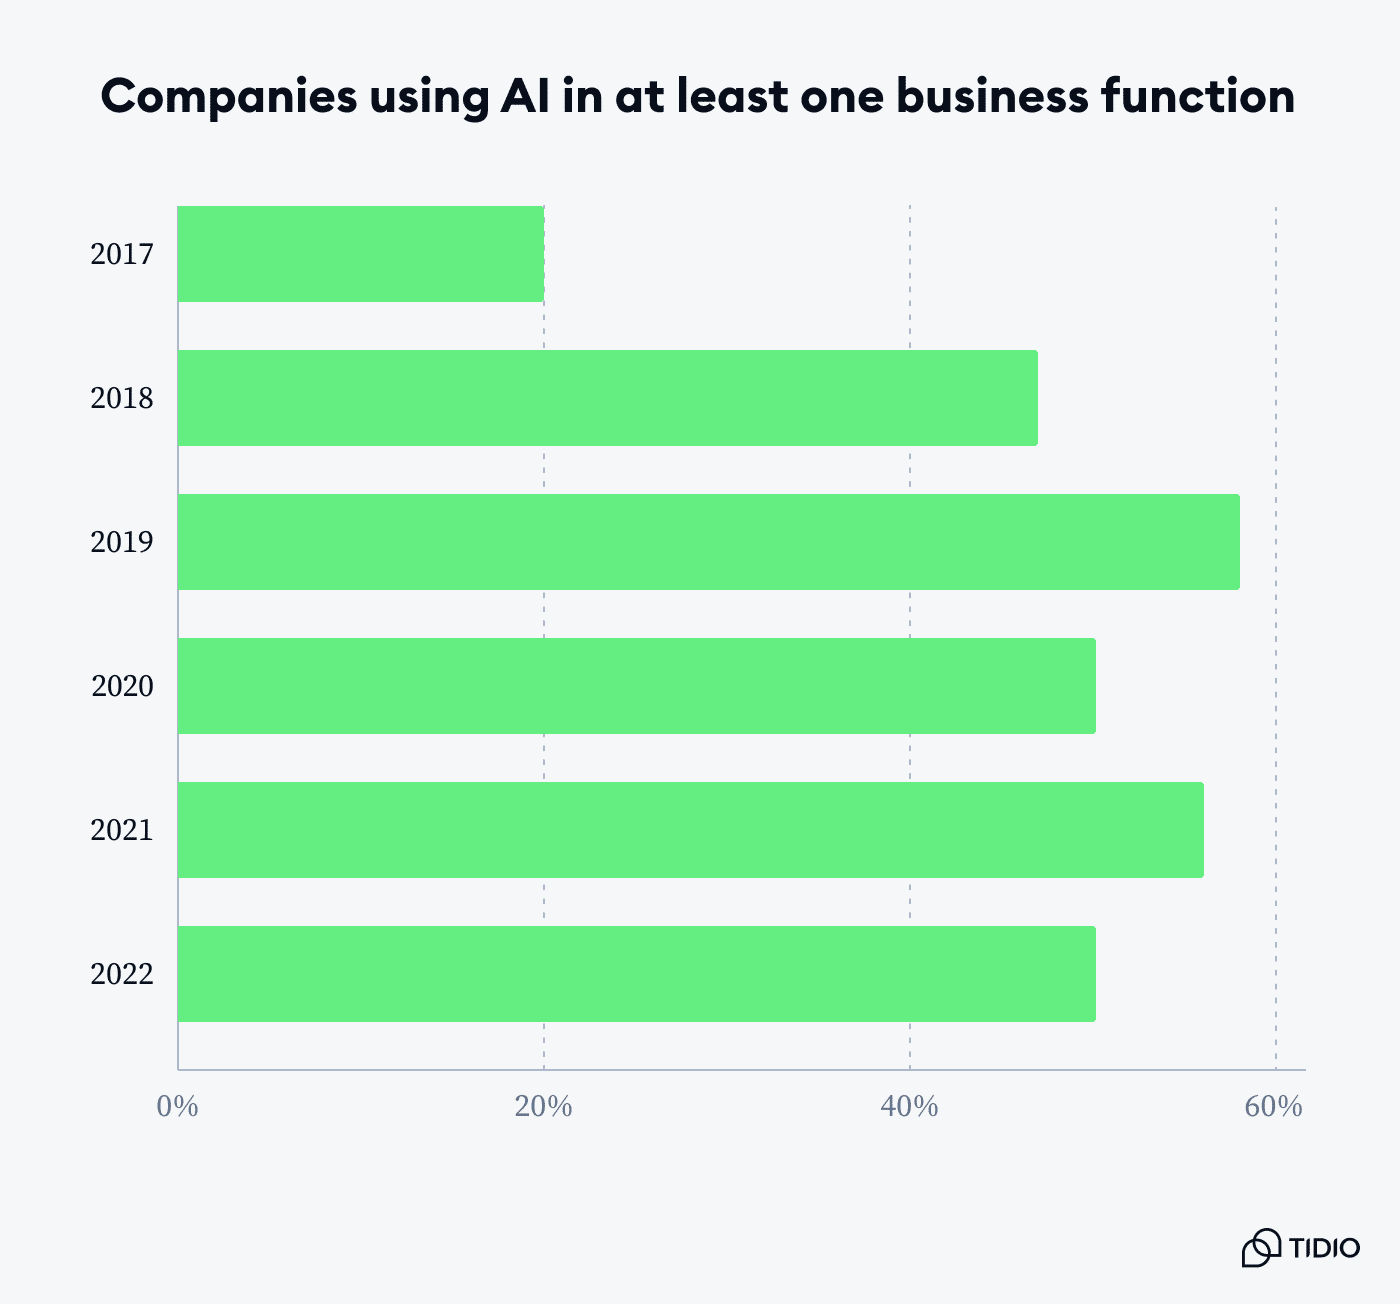 Companies using AI in at least one business function